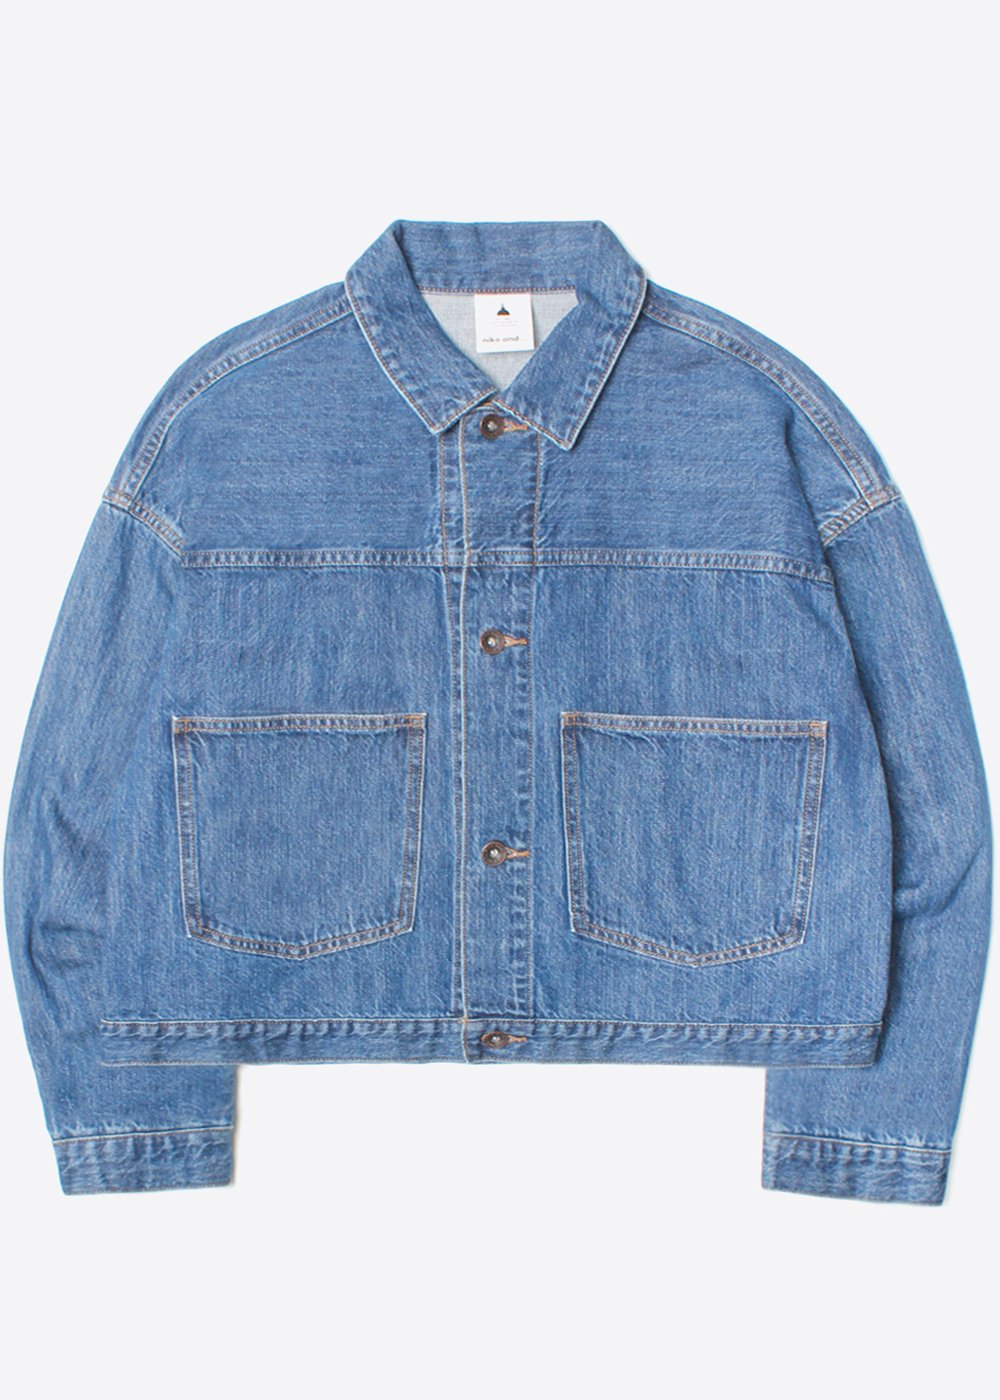 NIKO AND‘over fit’ cropped denim jacket